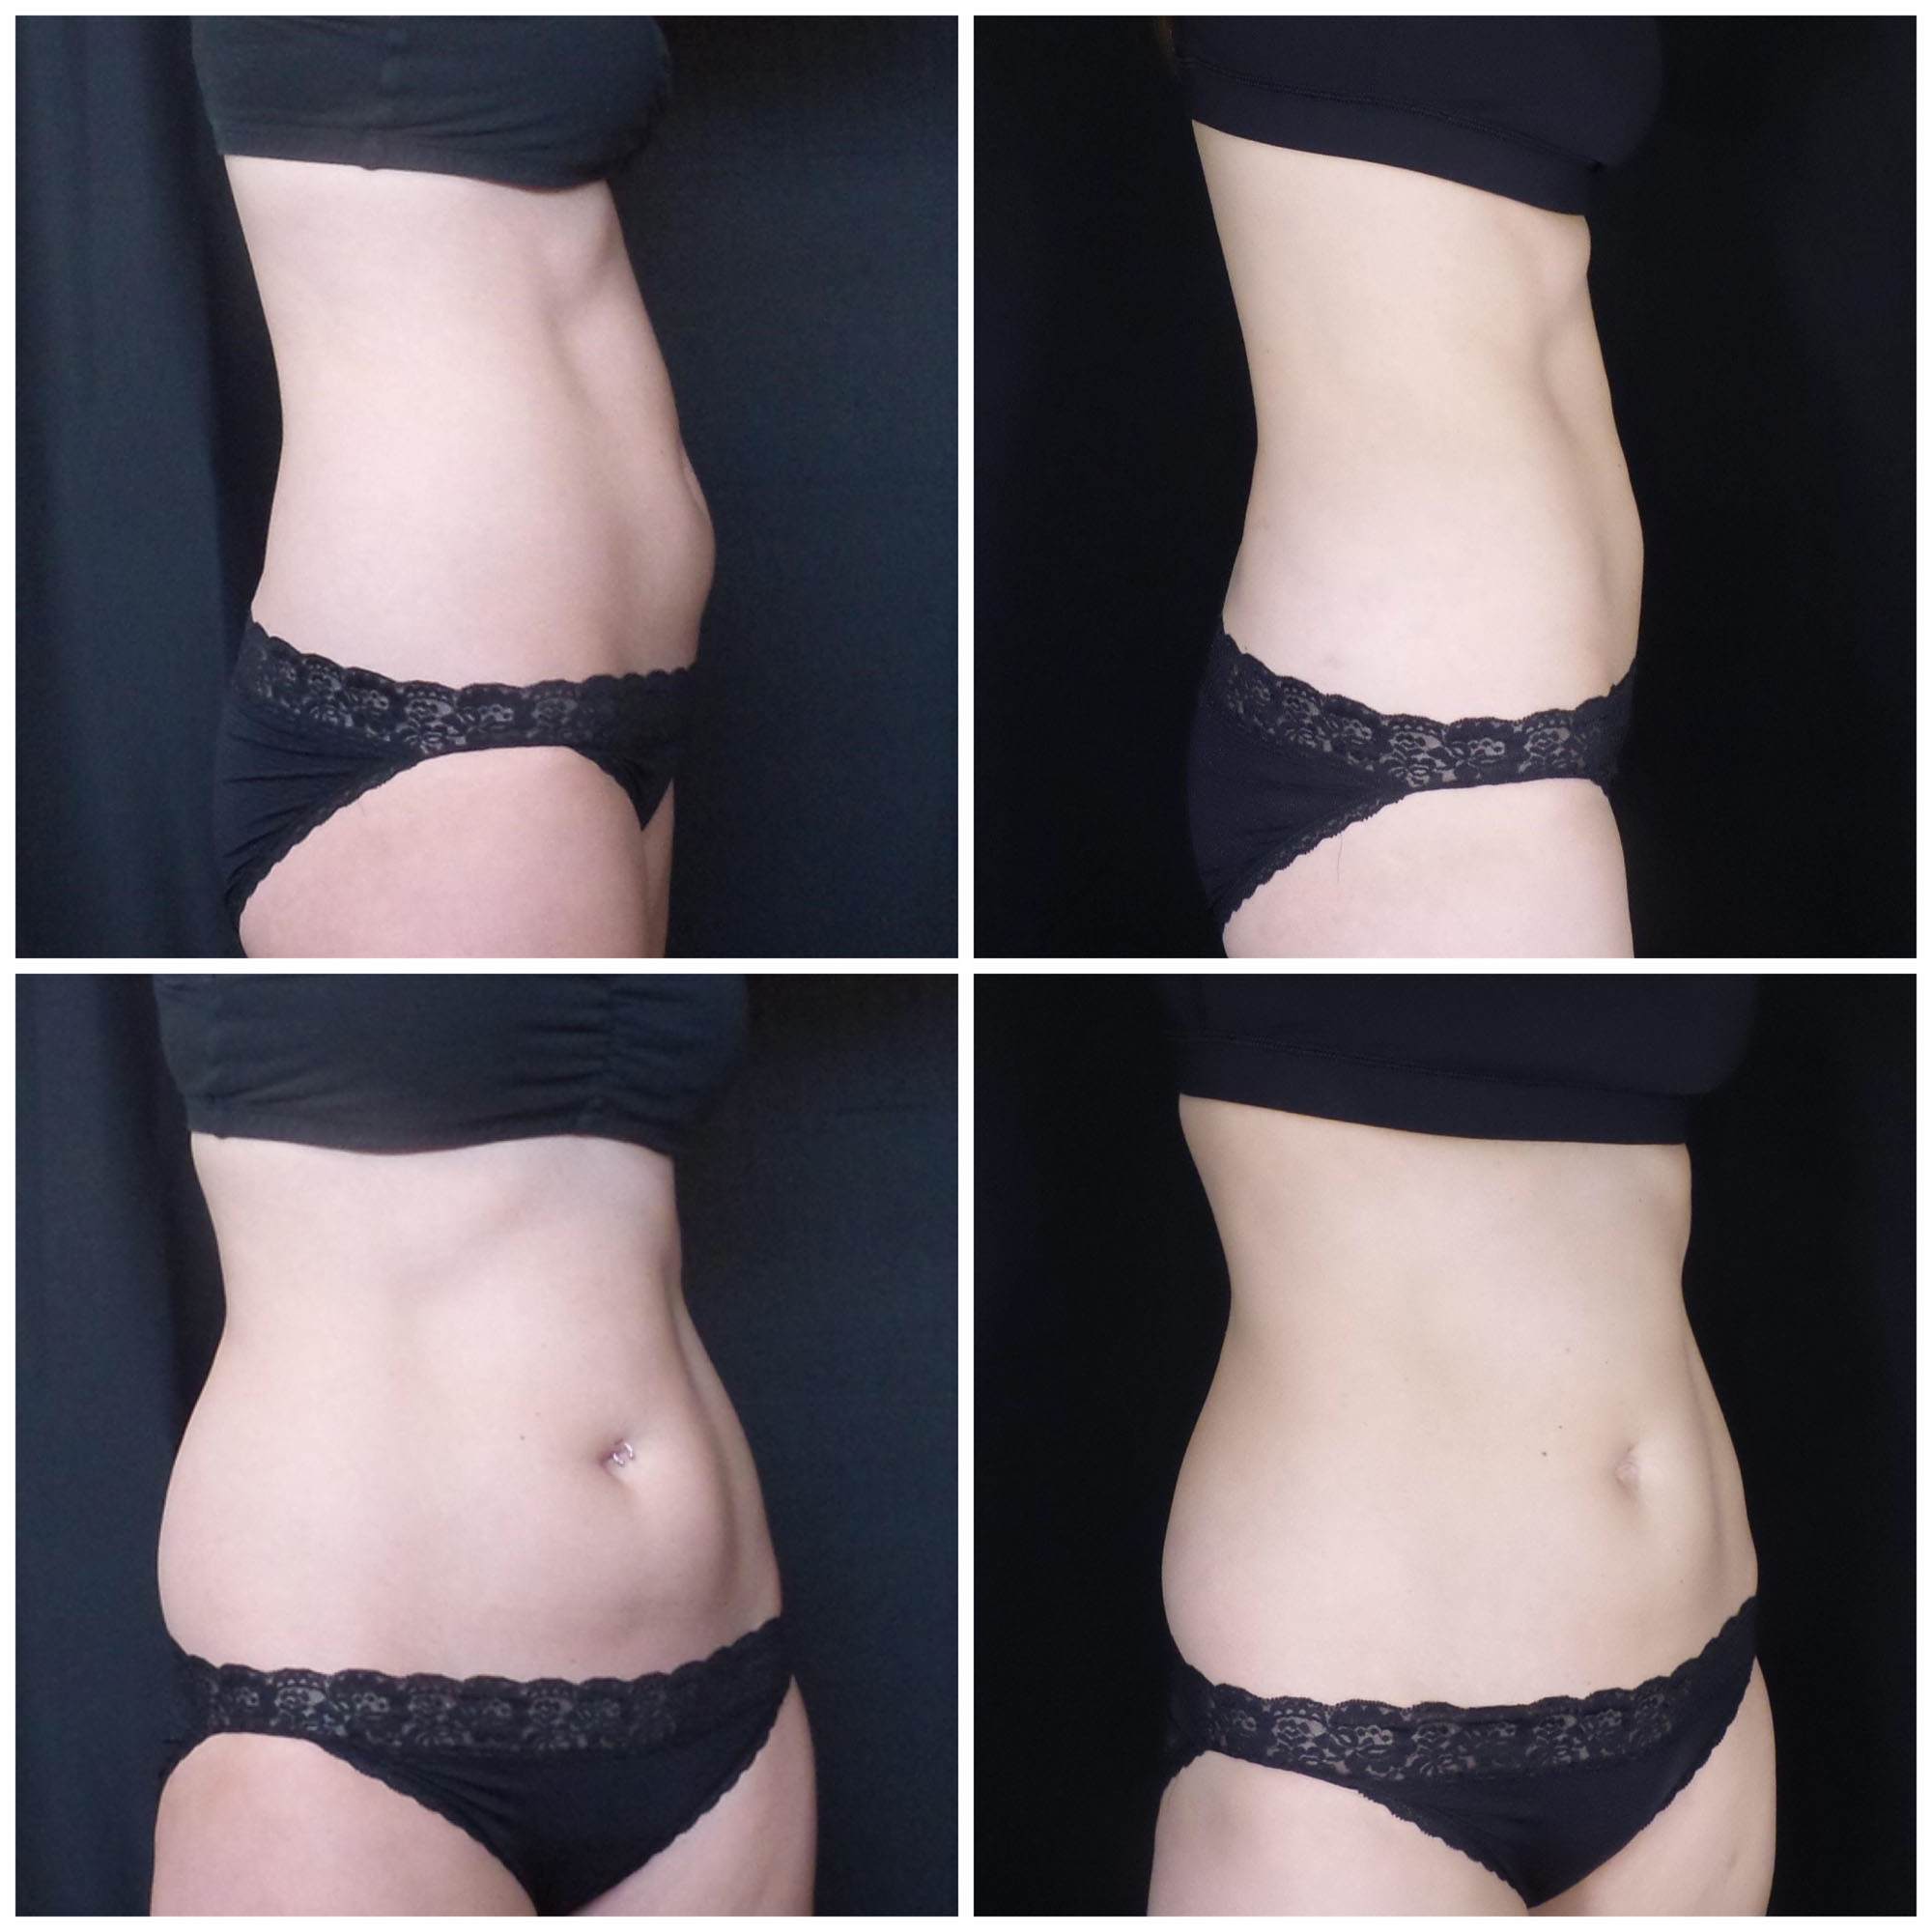 Abdomen CoolSculpting Before and After images from Refresh Aesthetic Center